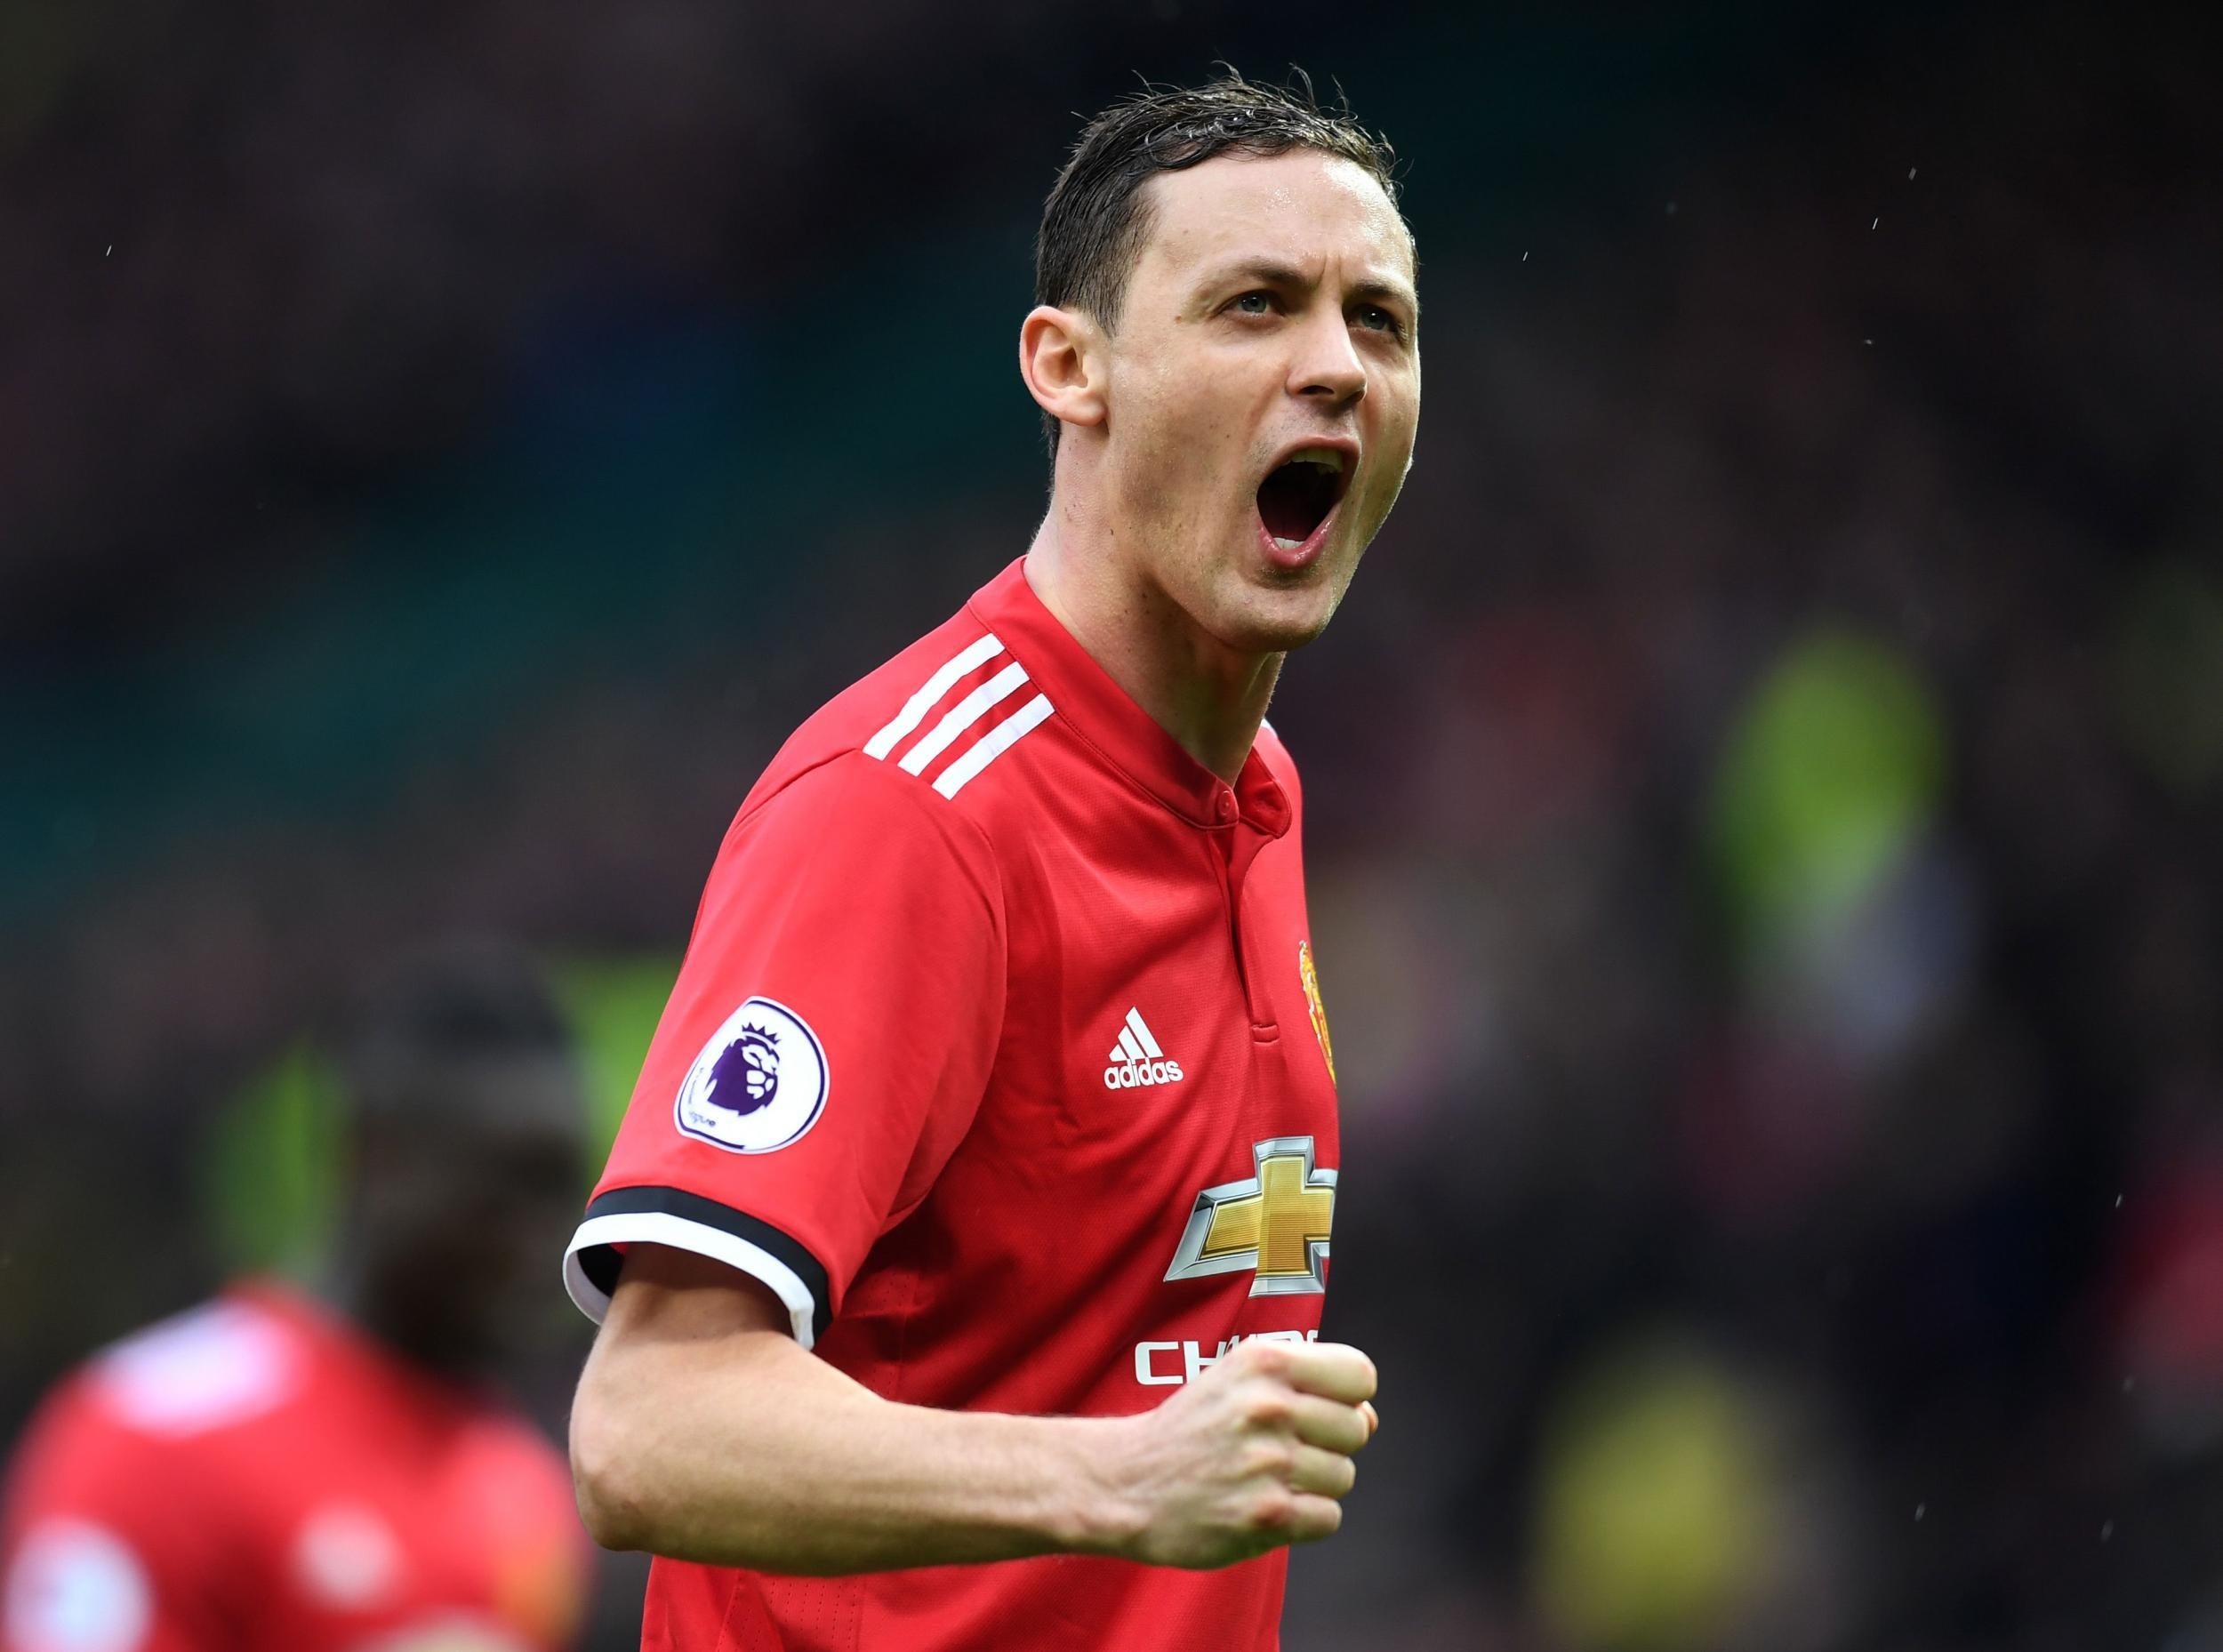 Nemanja Matic: Liverpool win &apos;very important&apos; for Manchester United confidence ahead of Sevilla tie